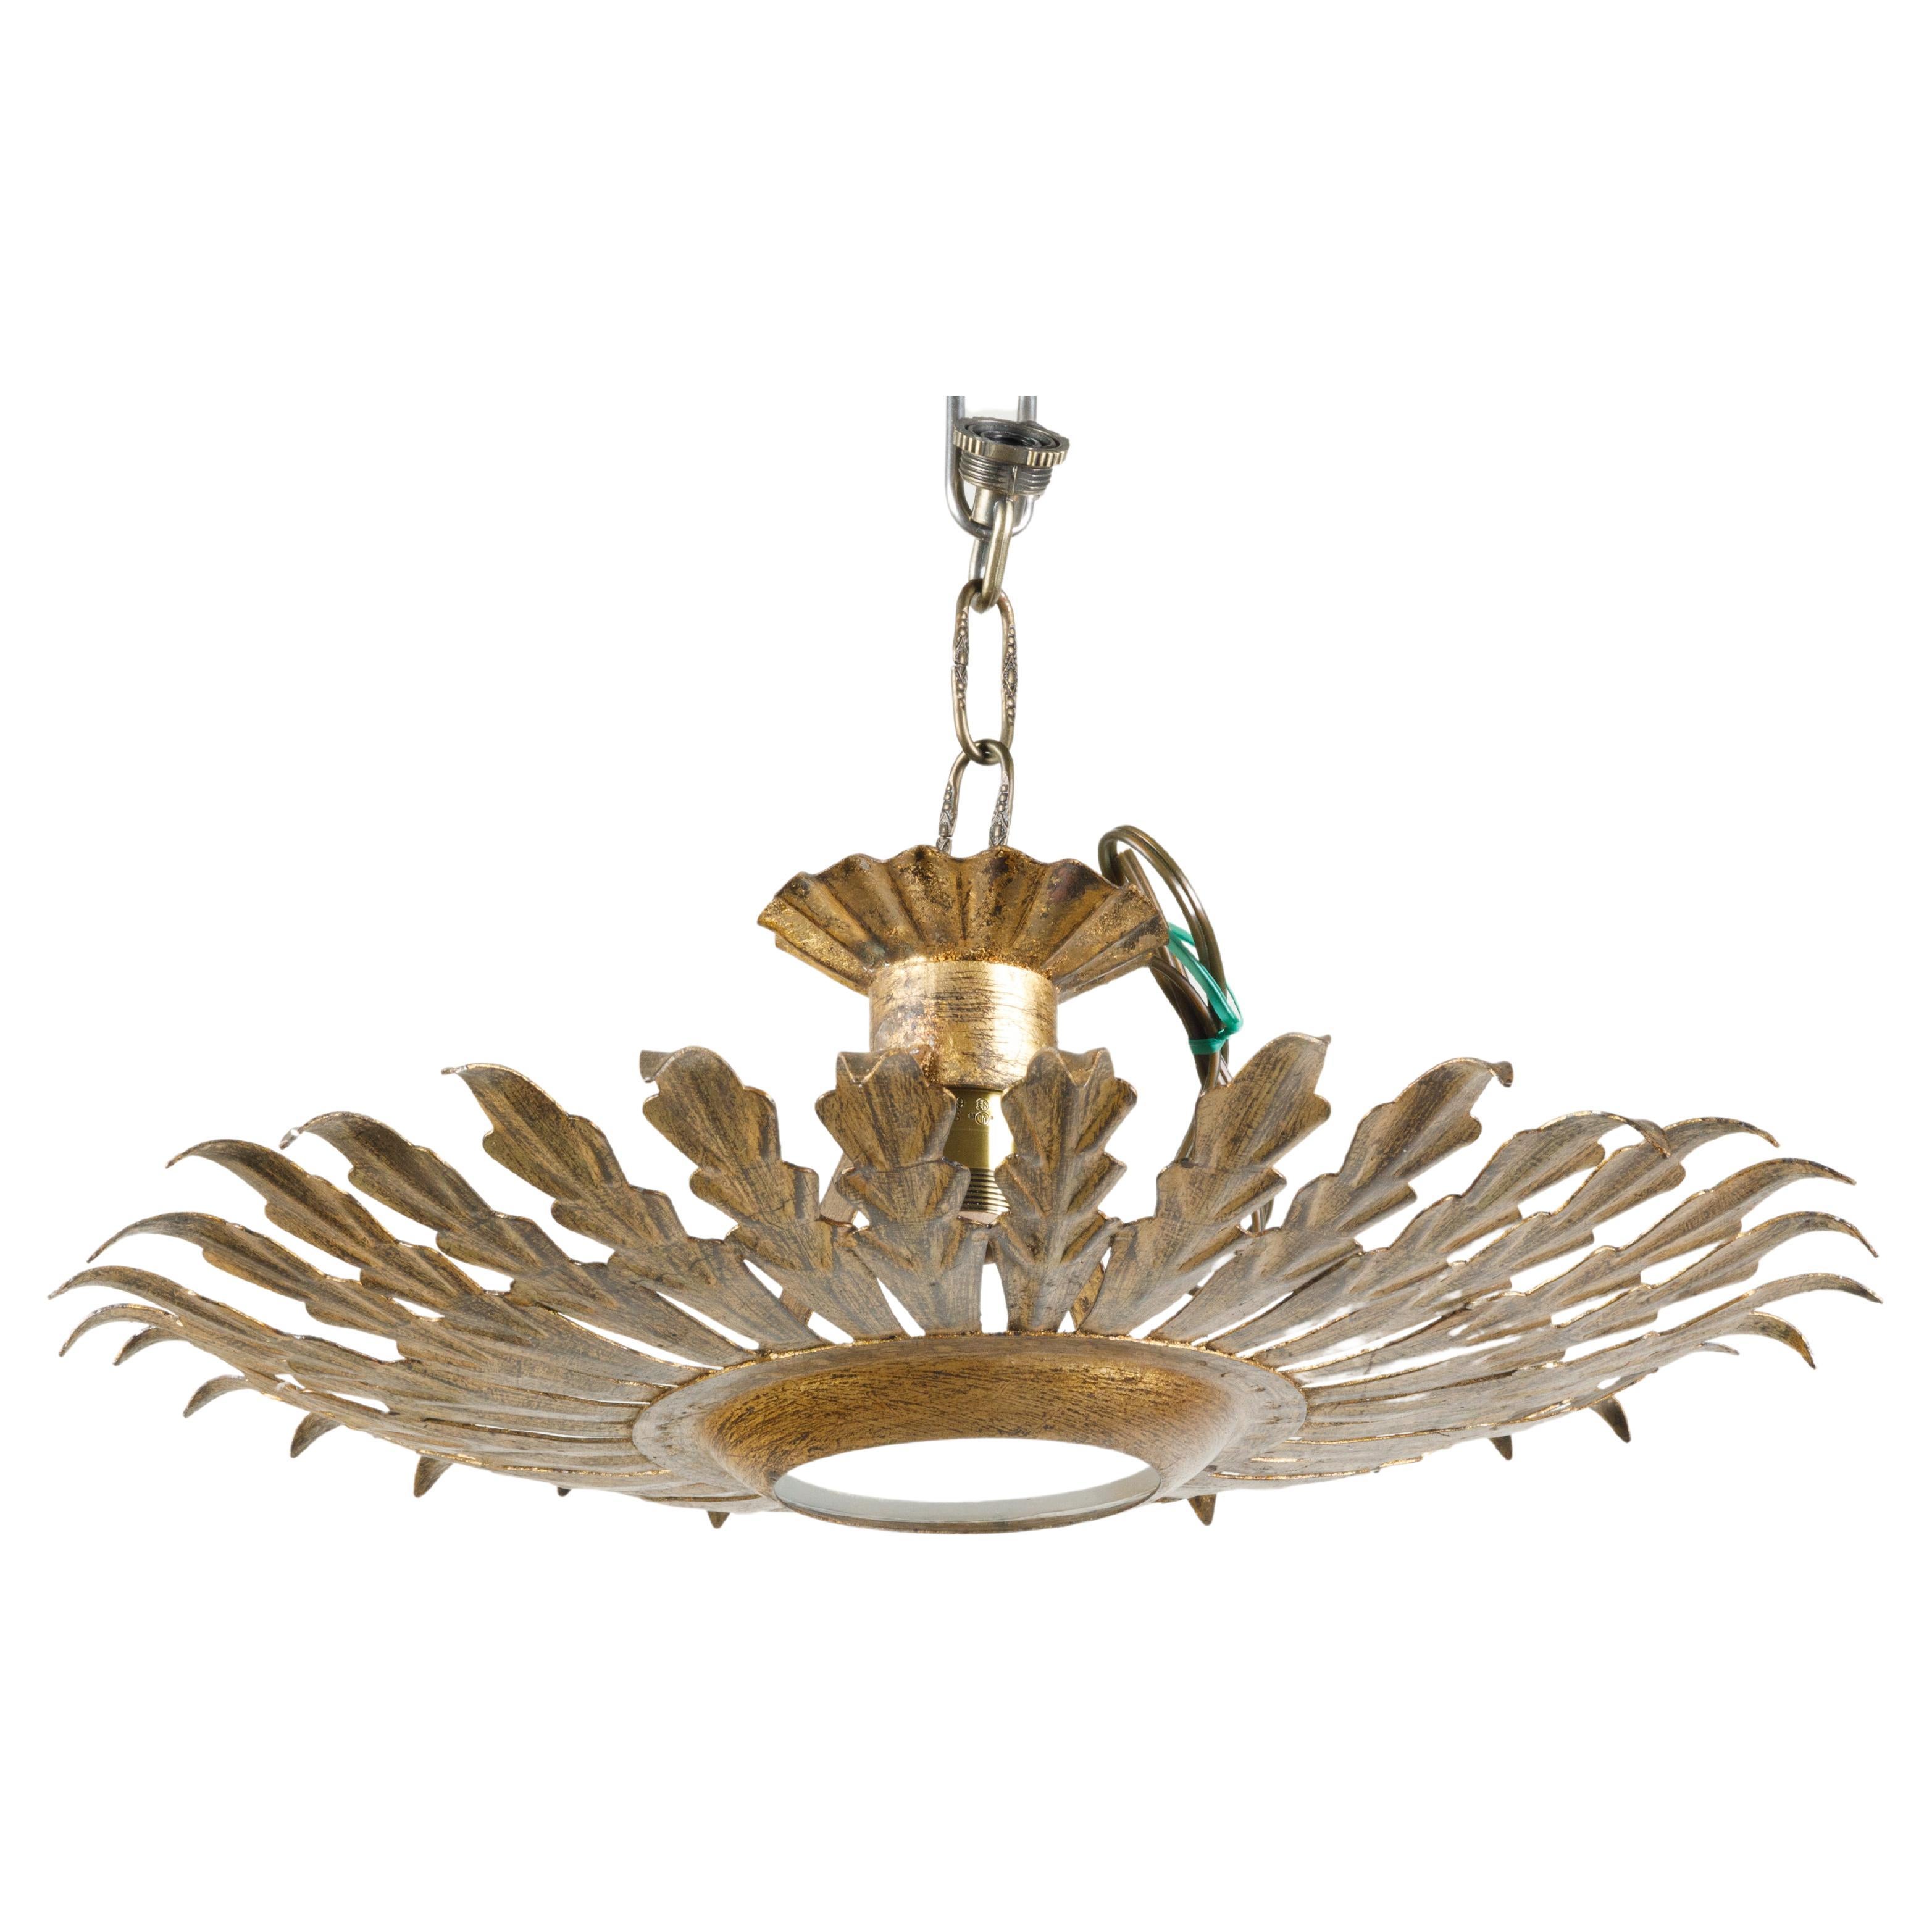 Spanish Mid-Century Gilt Metal Crown Chandelier with Leaves and Frosted Glass